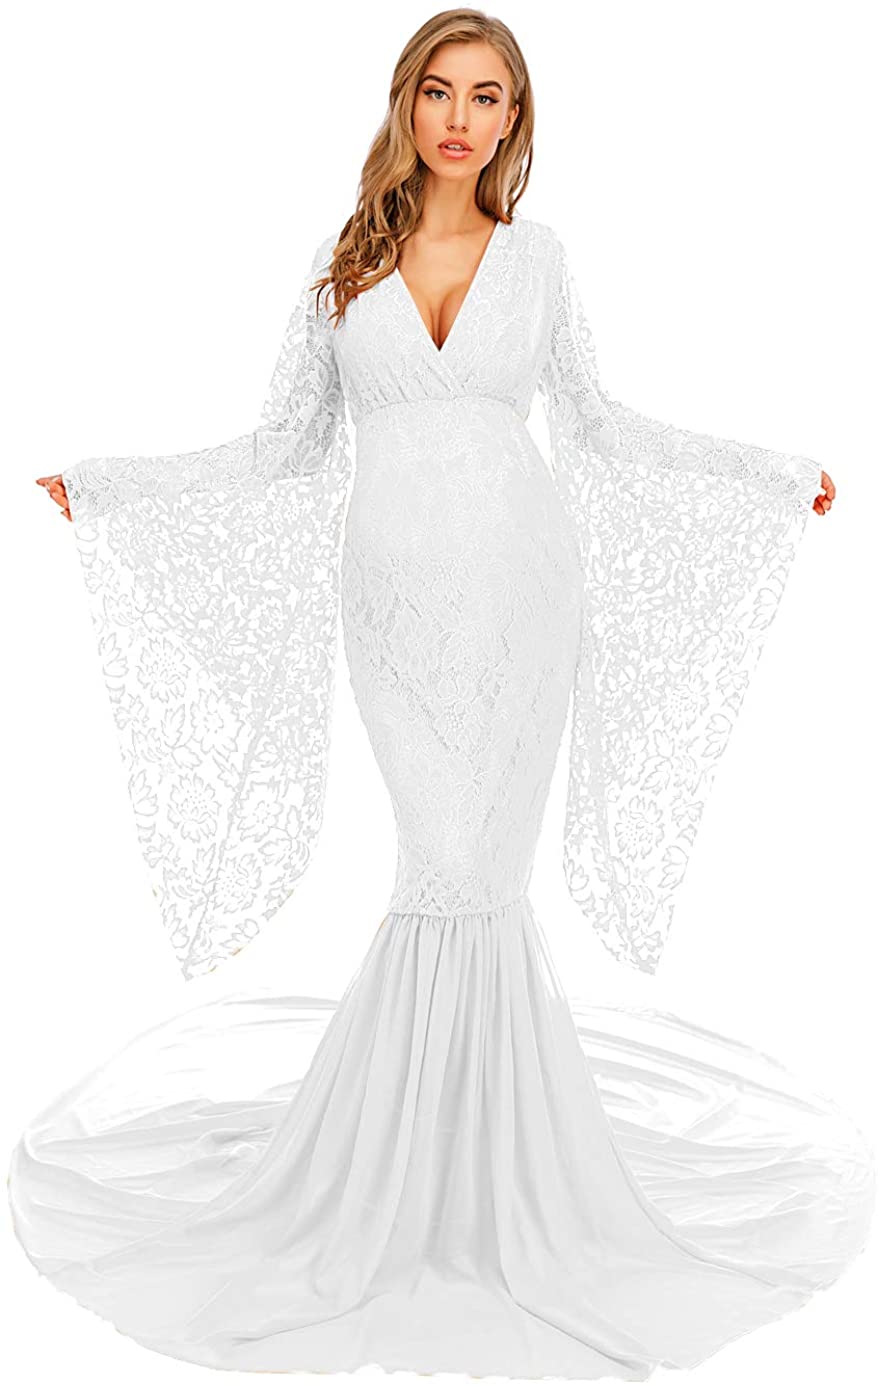 Deep V Neck Flared Sleeve with Long Chiffon Train Lace Dress Maternity Gown for Photography